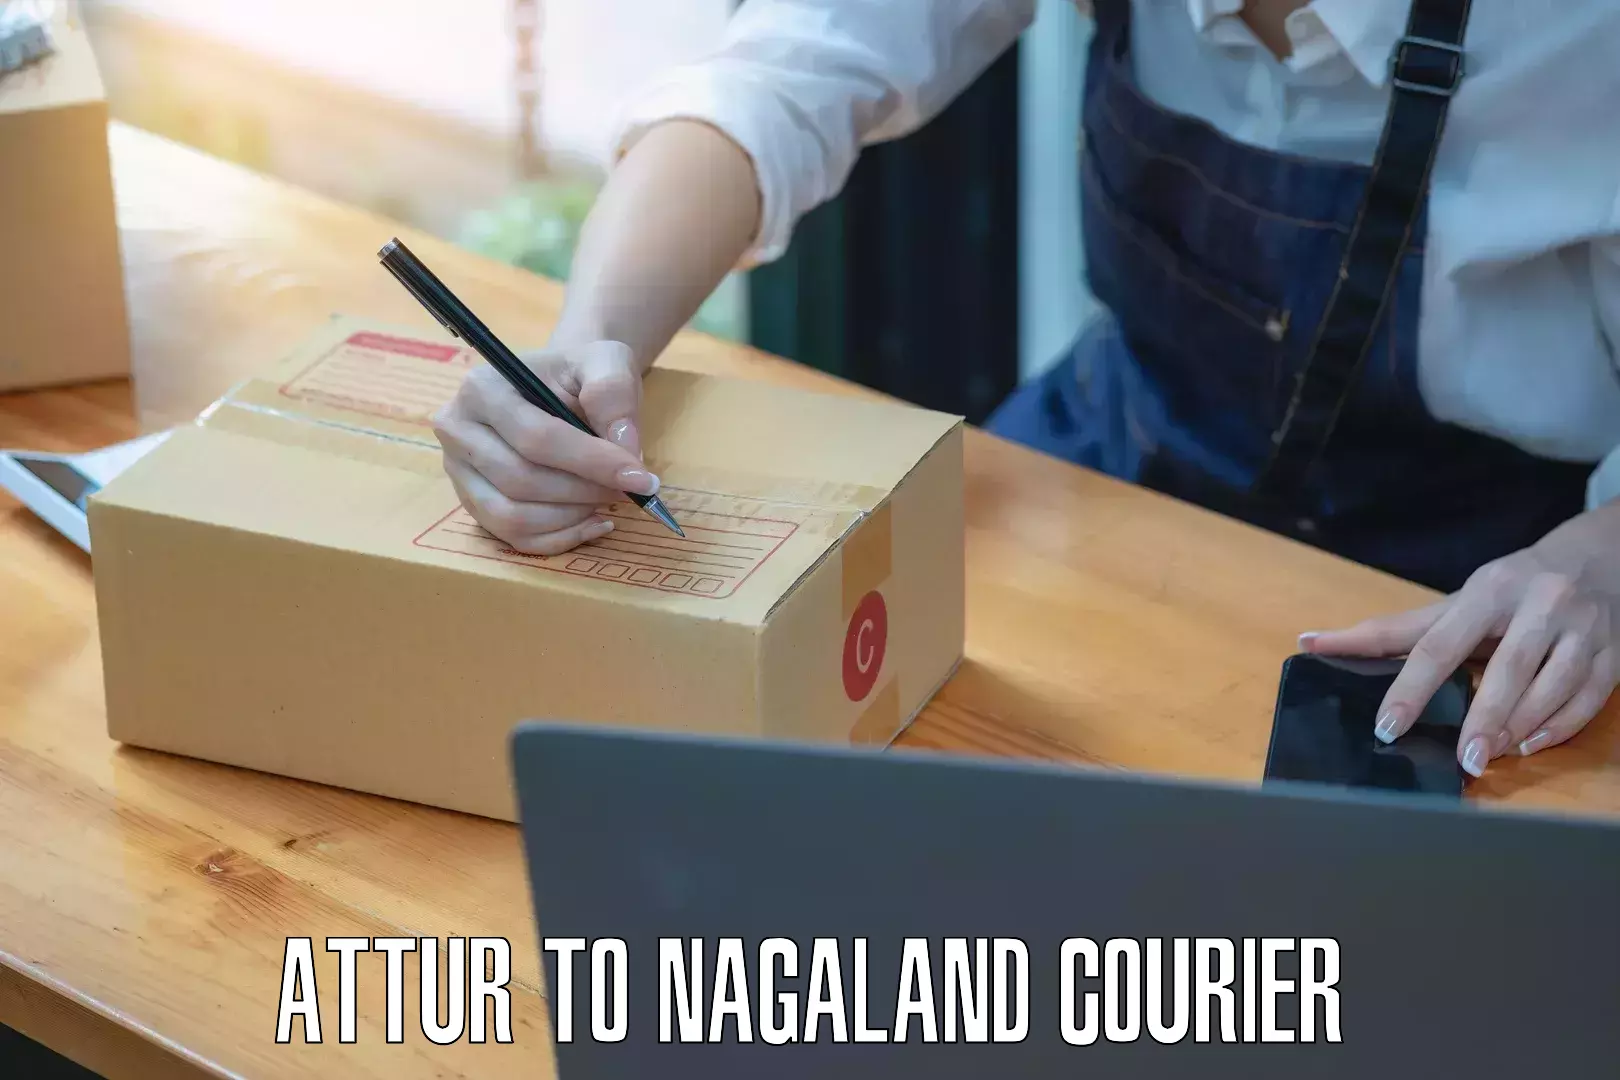 Courier service booking Attur to Nagaland